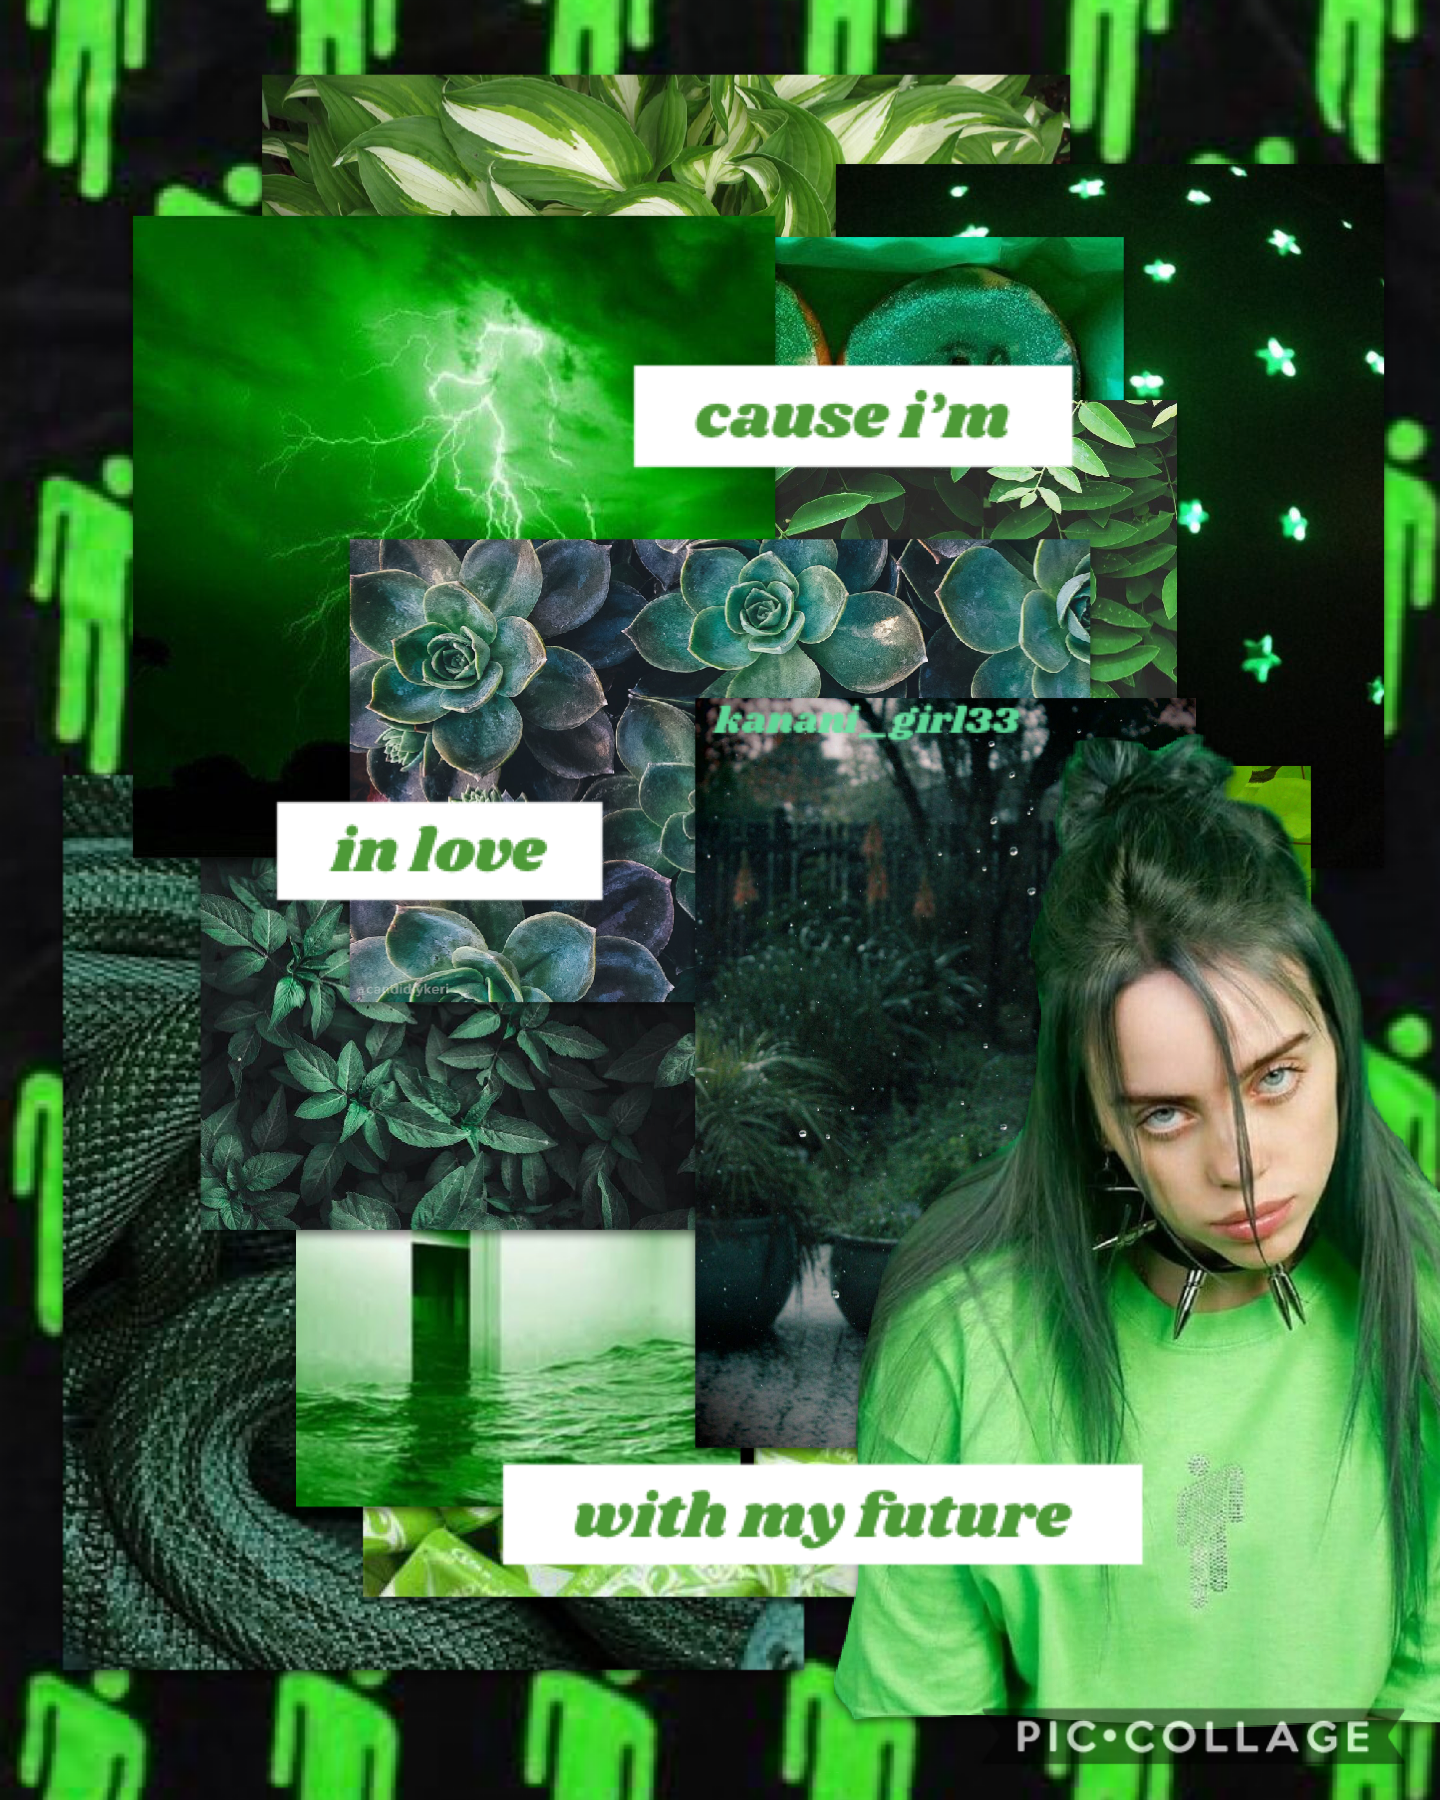 💚tap💚
october 13, 2020
here’s an edit with one of billie‘s newer songs!! what have you guys been up to? i hope you have a wonderful week! 💗